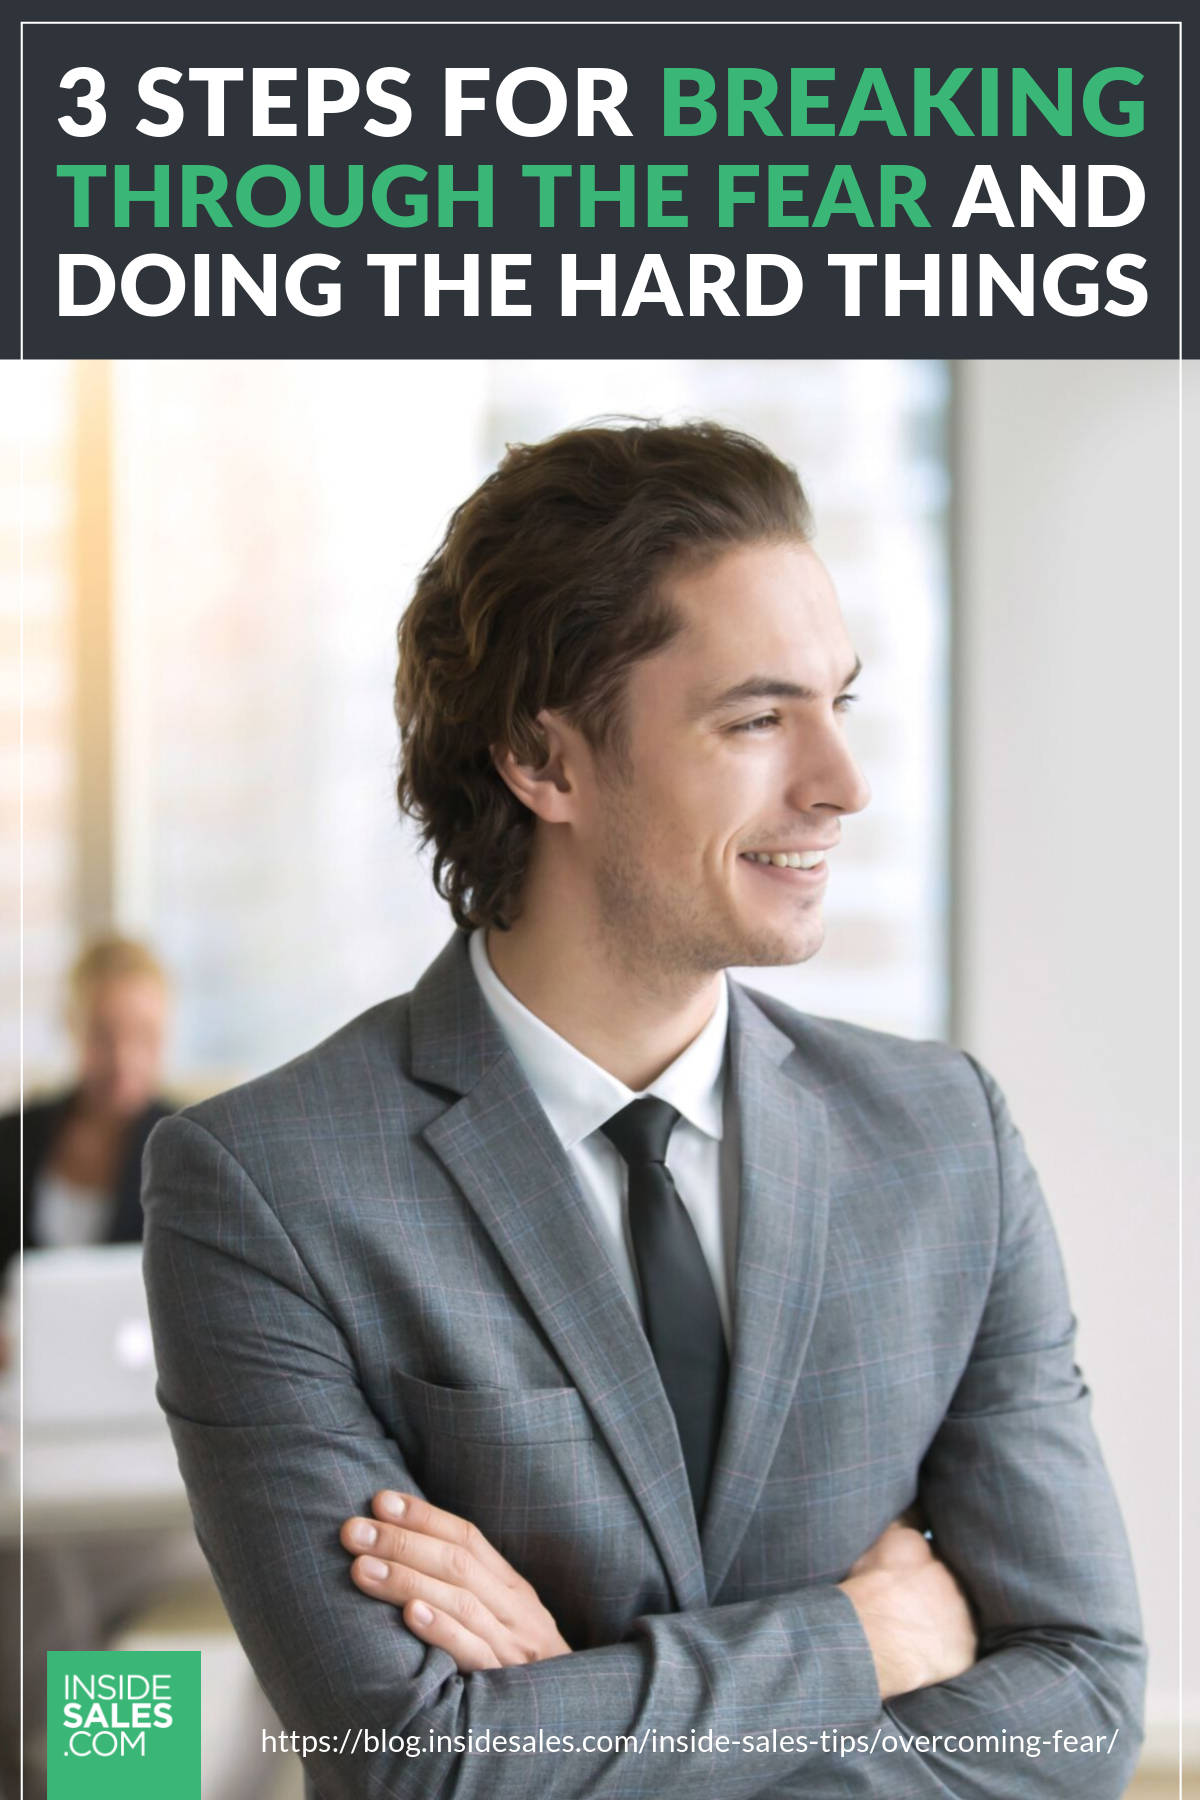 Three Steps For Breaking Through The Fear And Doing The Hard Things https://www.insidesales.com/blog/inside-sales-tips/overcoming-fear/